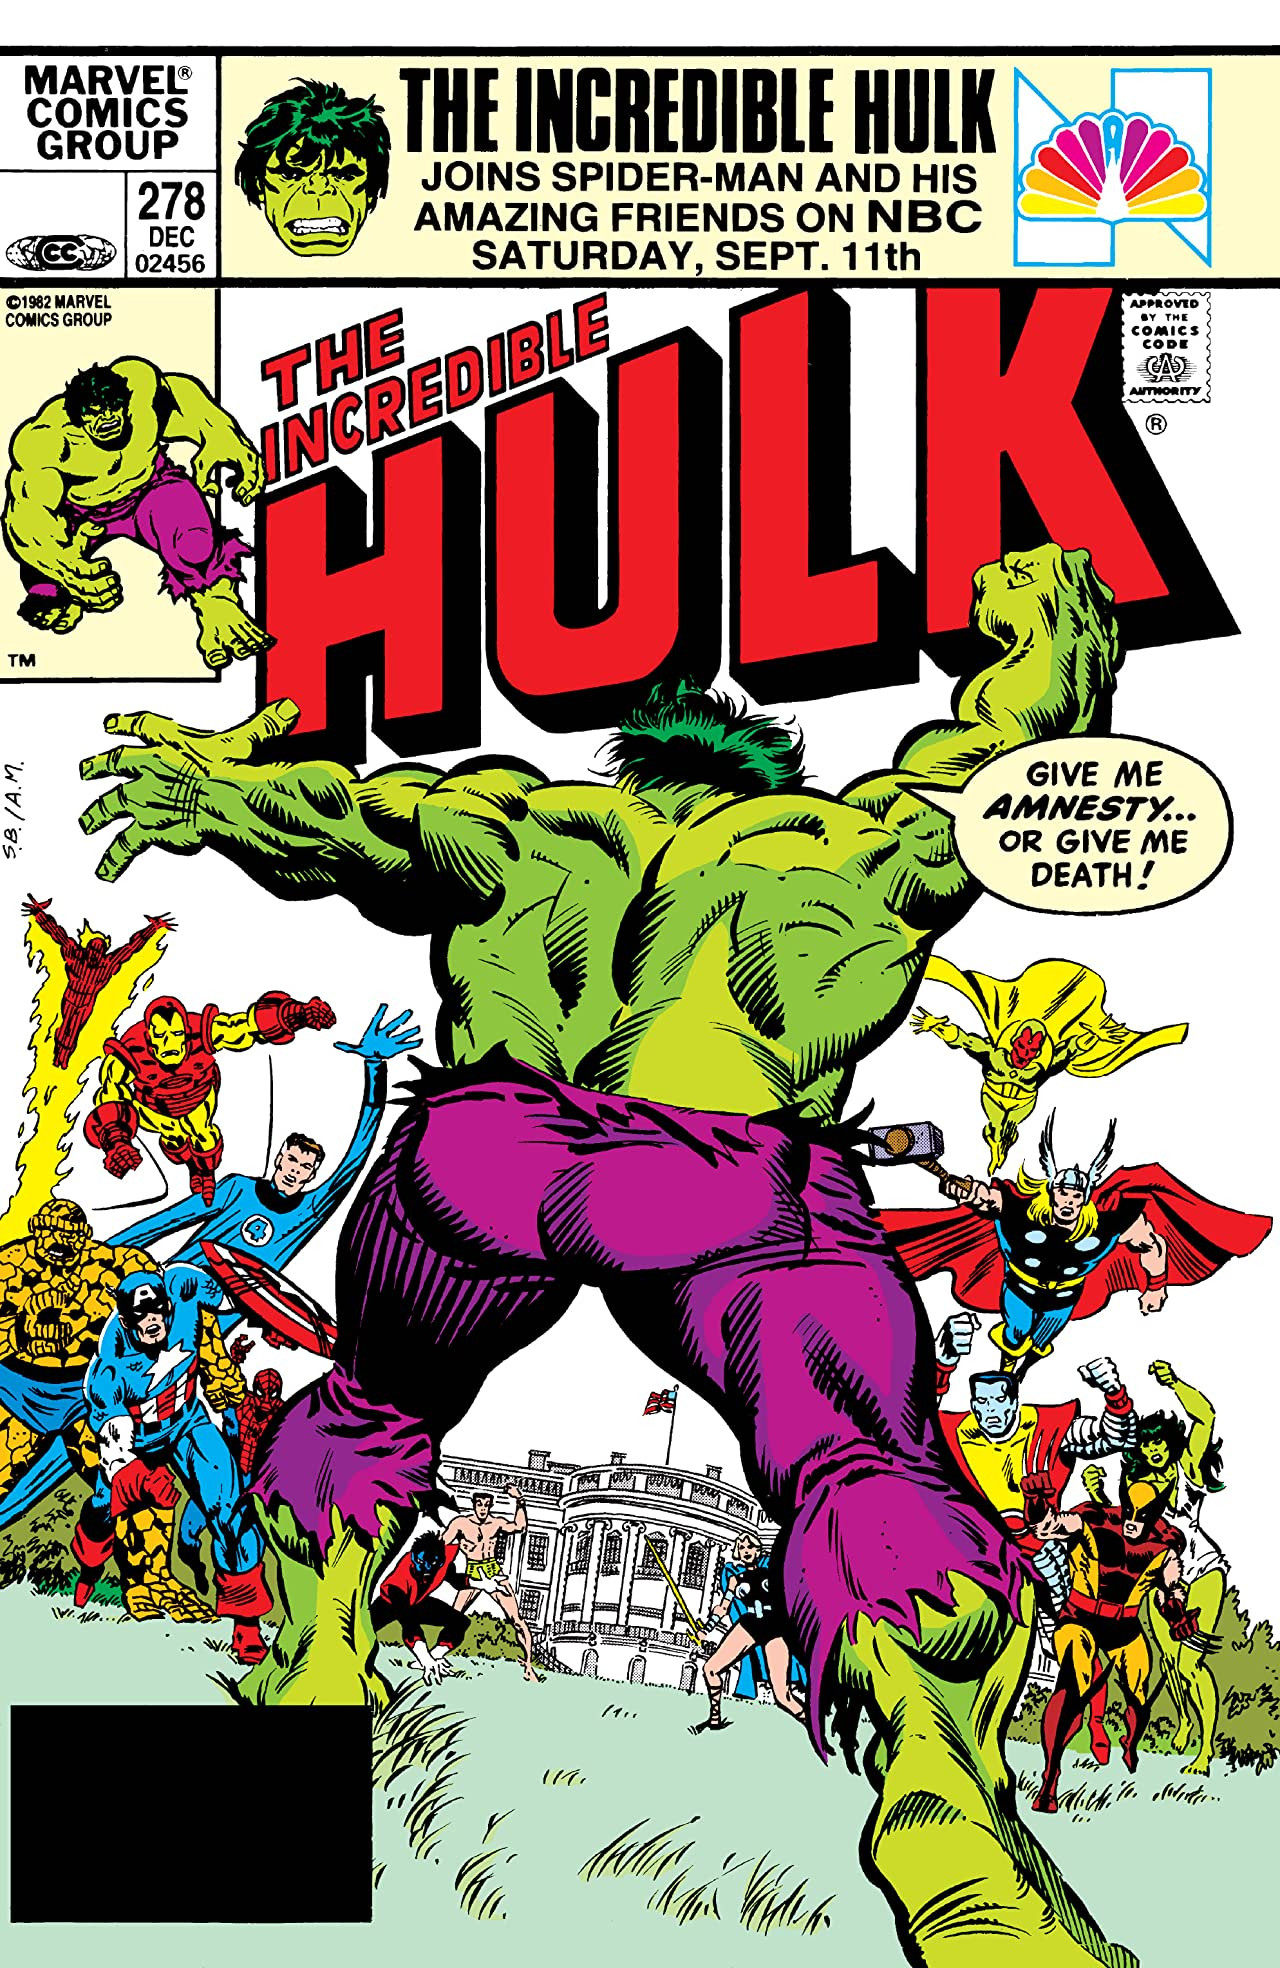 Details about   INCREDIBLE HULK MARVEL COMICS YOUR CHOICE $5.00 EACH 1982-1983